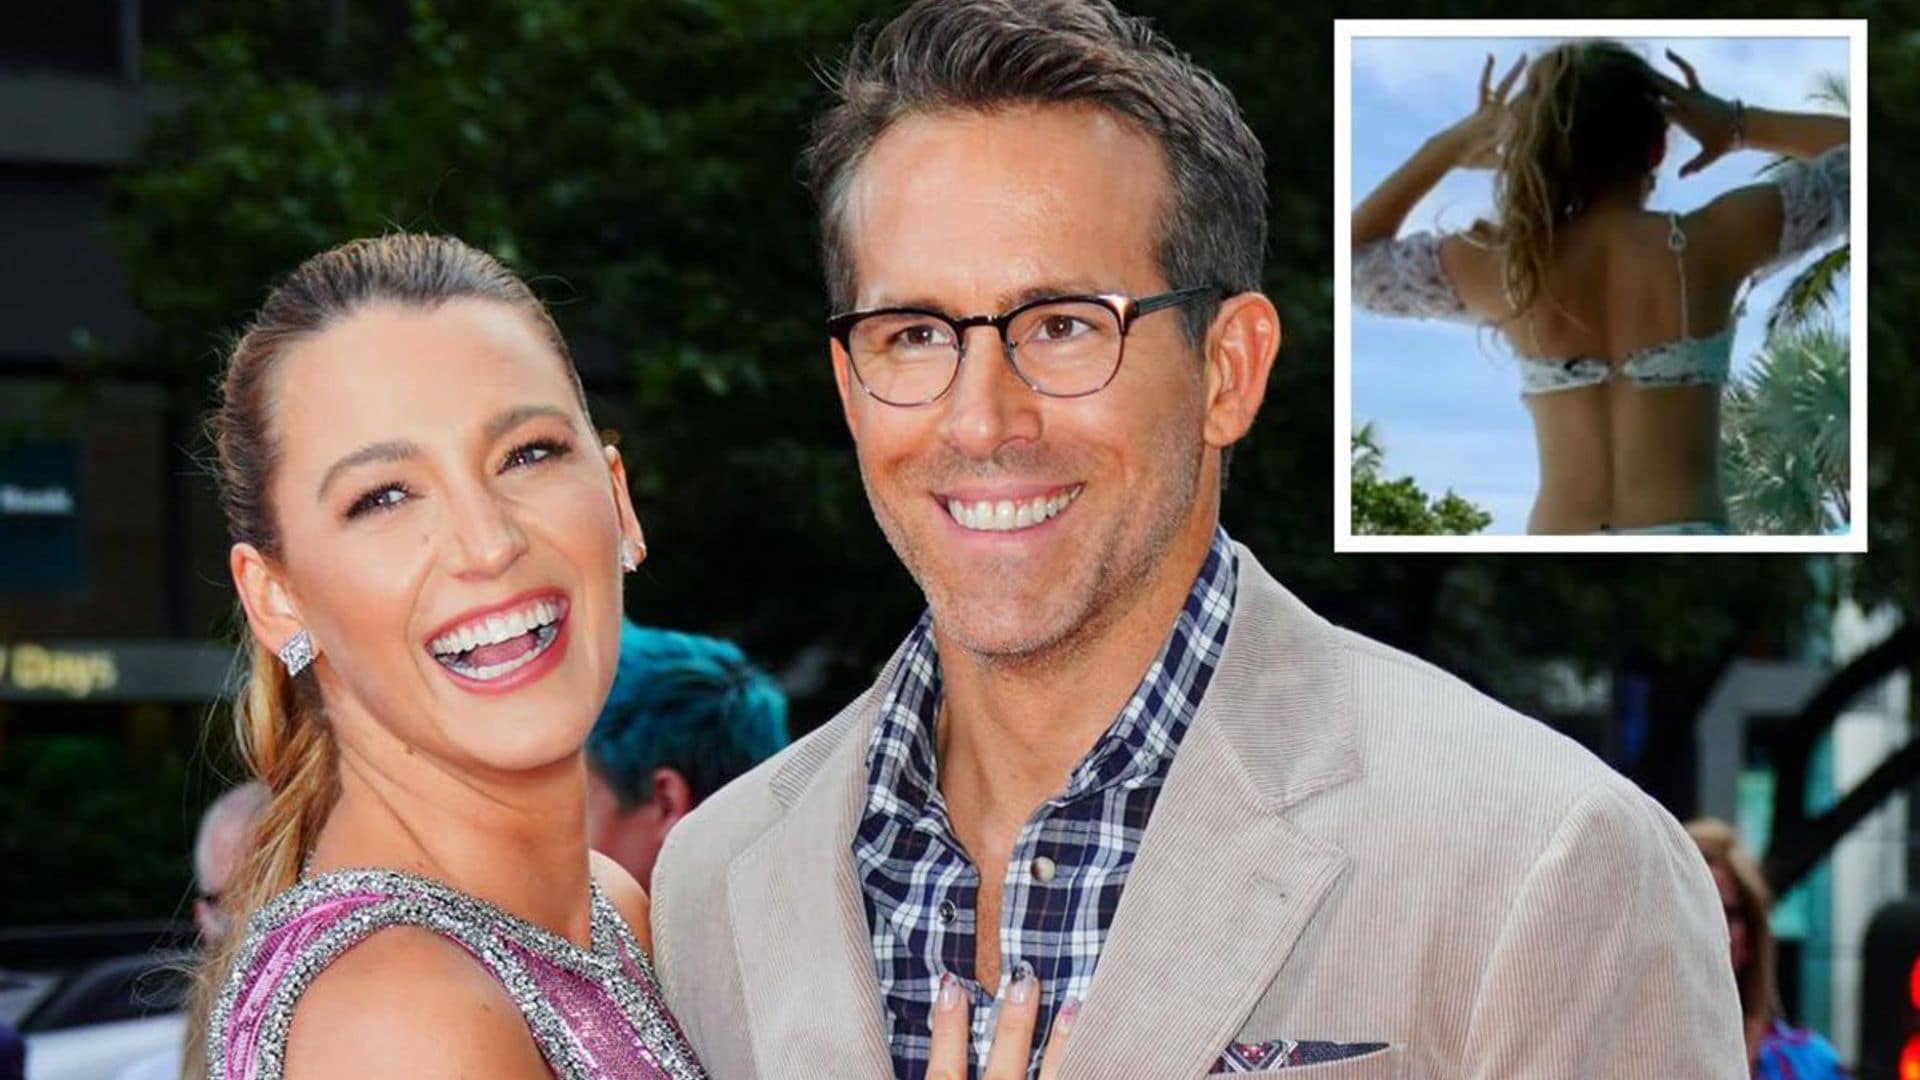 Blake Lively shares a cheeky bikini pic and says you’ll be bummed if you miss Ryan Reynold’s movie ‘Free Guy’